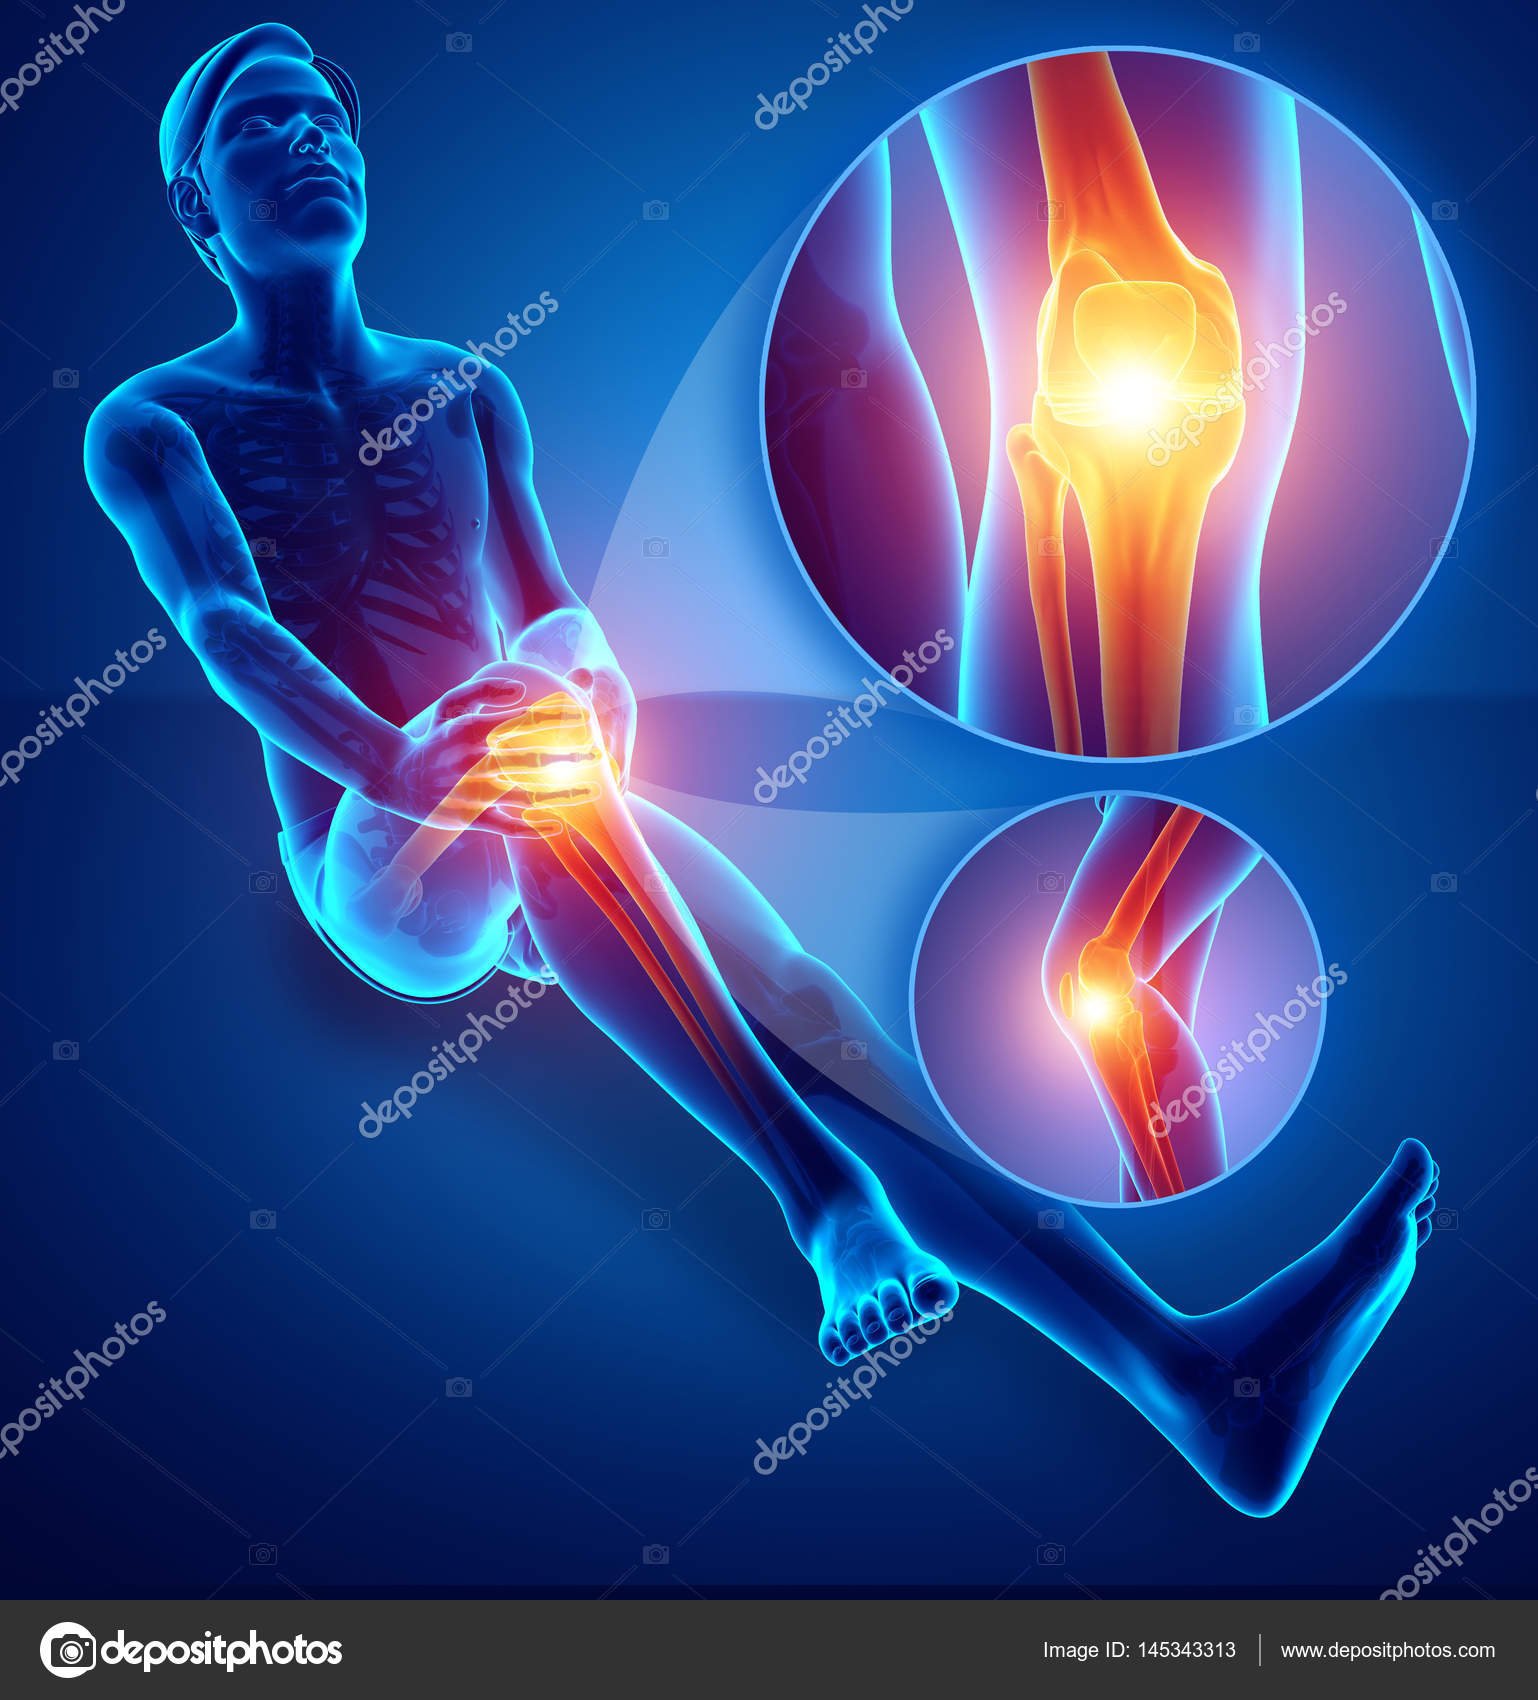 Health Scoop : JOINT PAIN AND ARTHRITIS